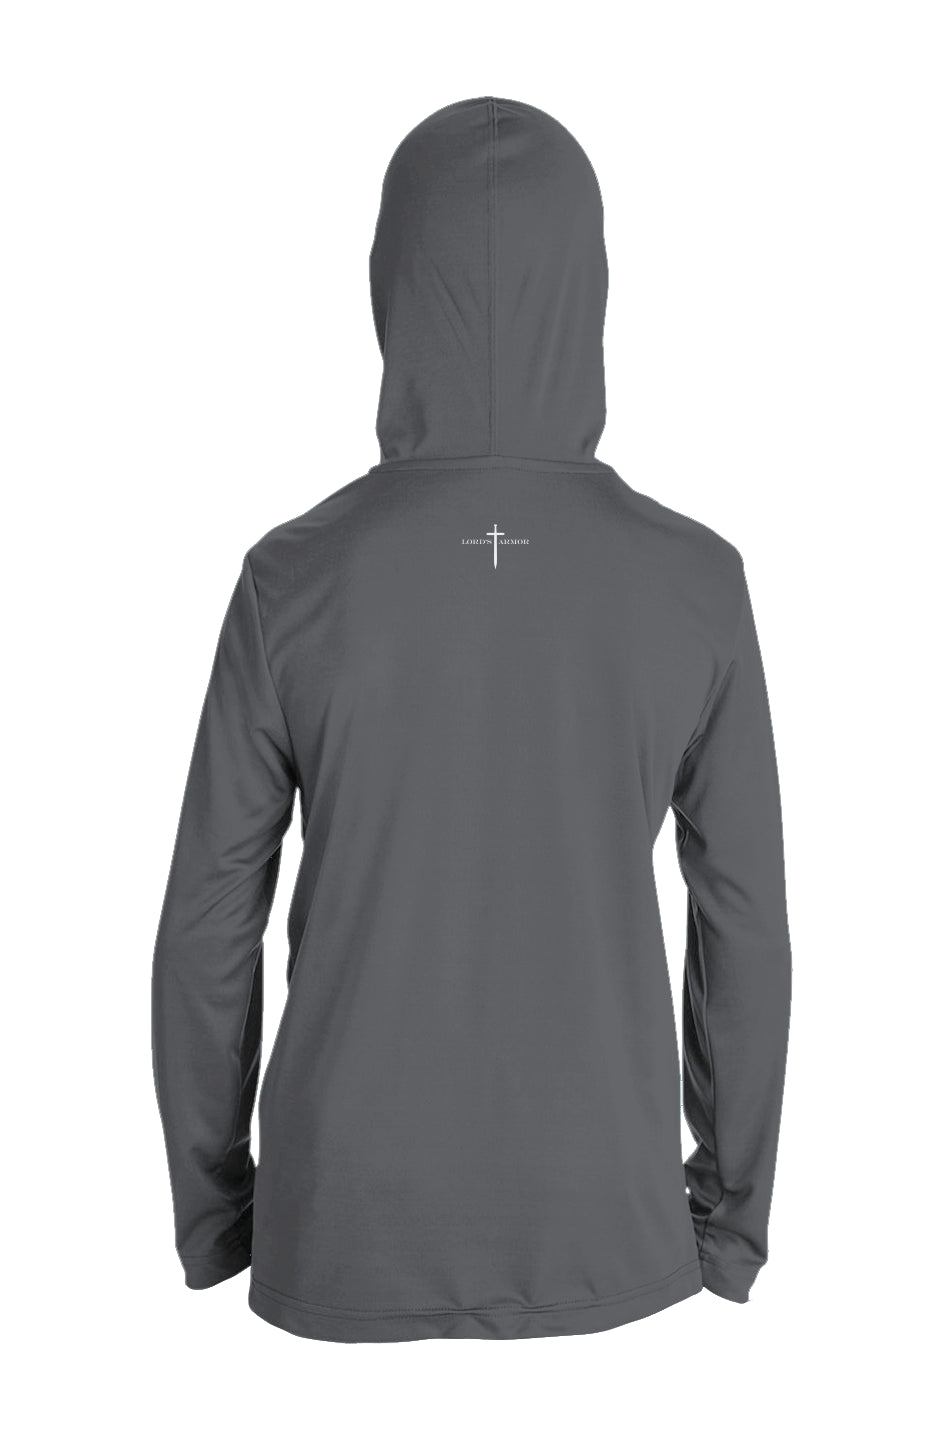 Youth Hooded Performance Long Sleeve